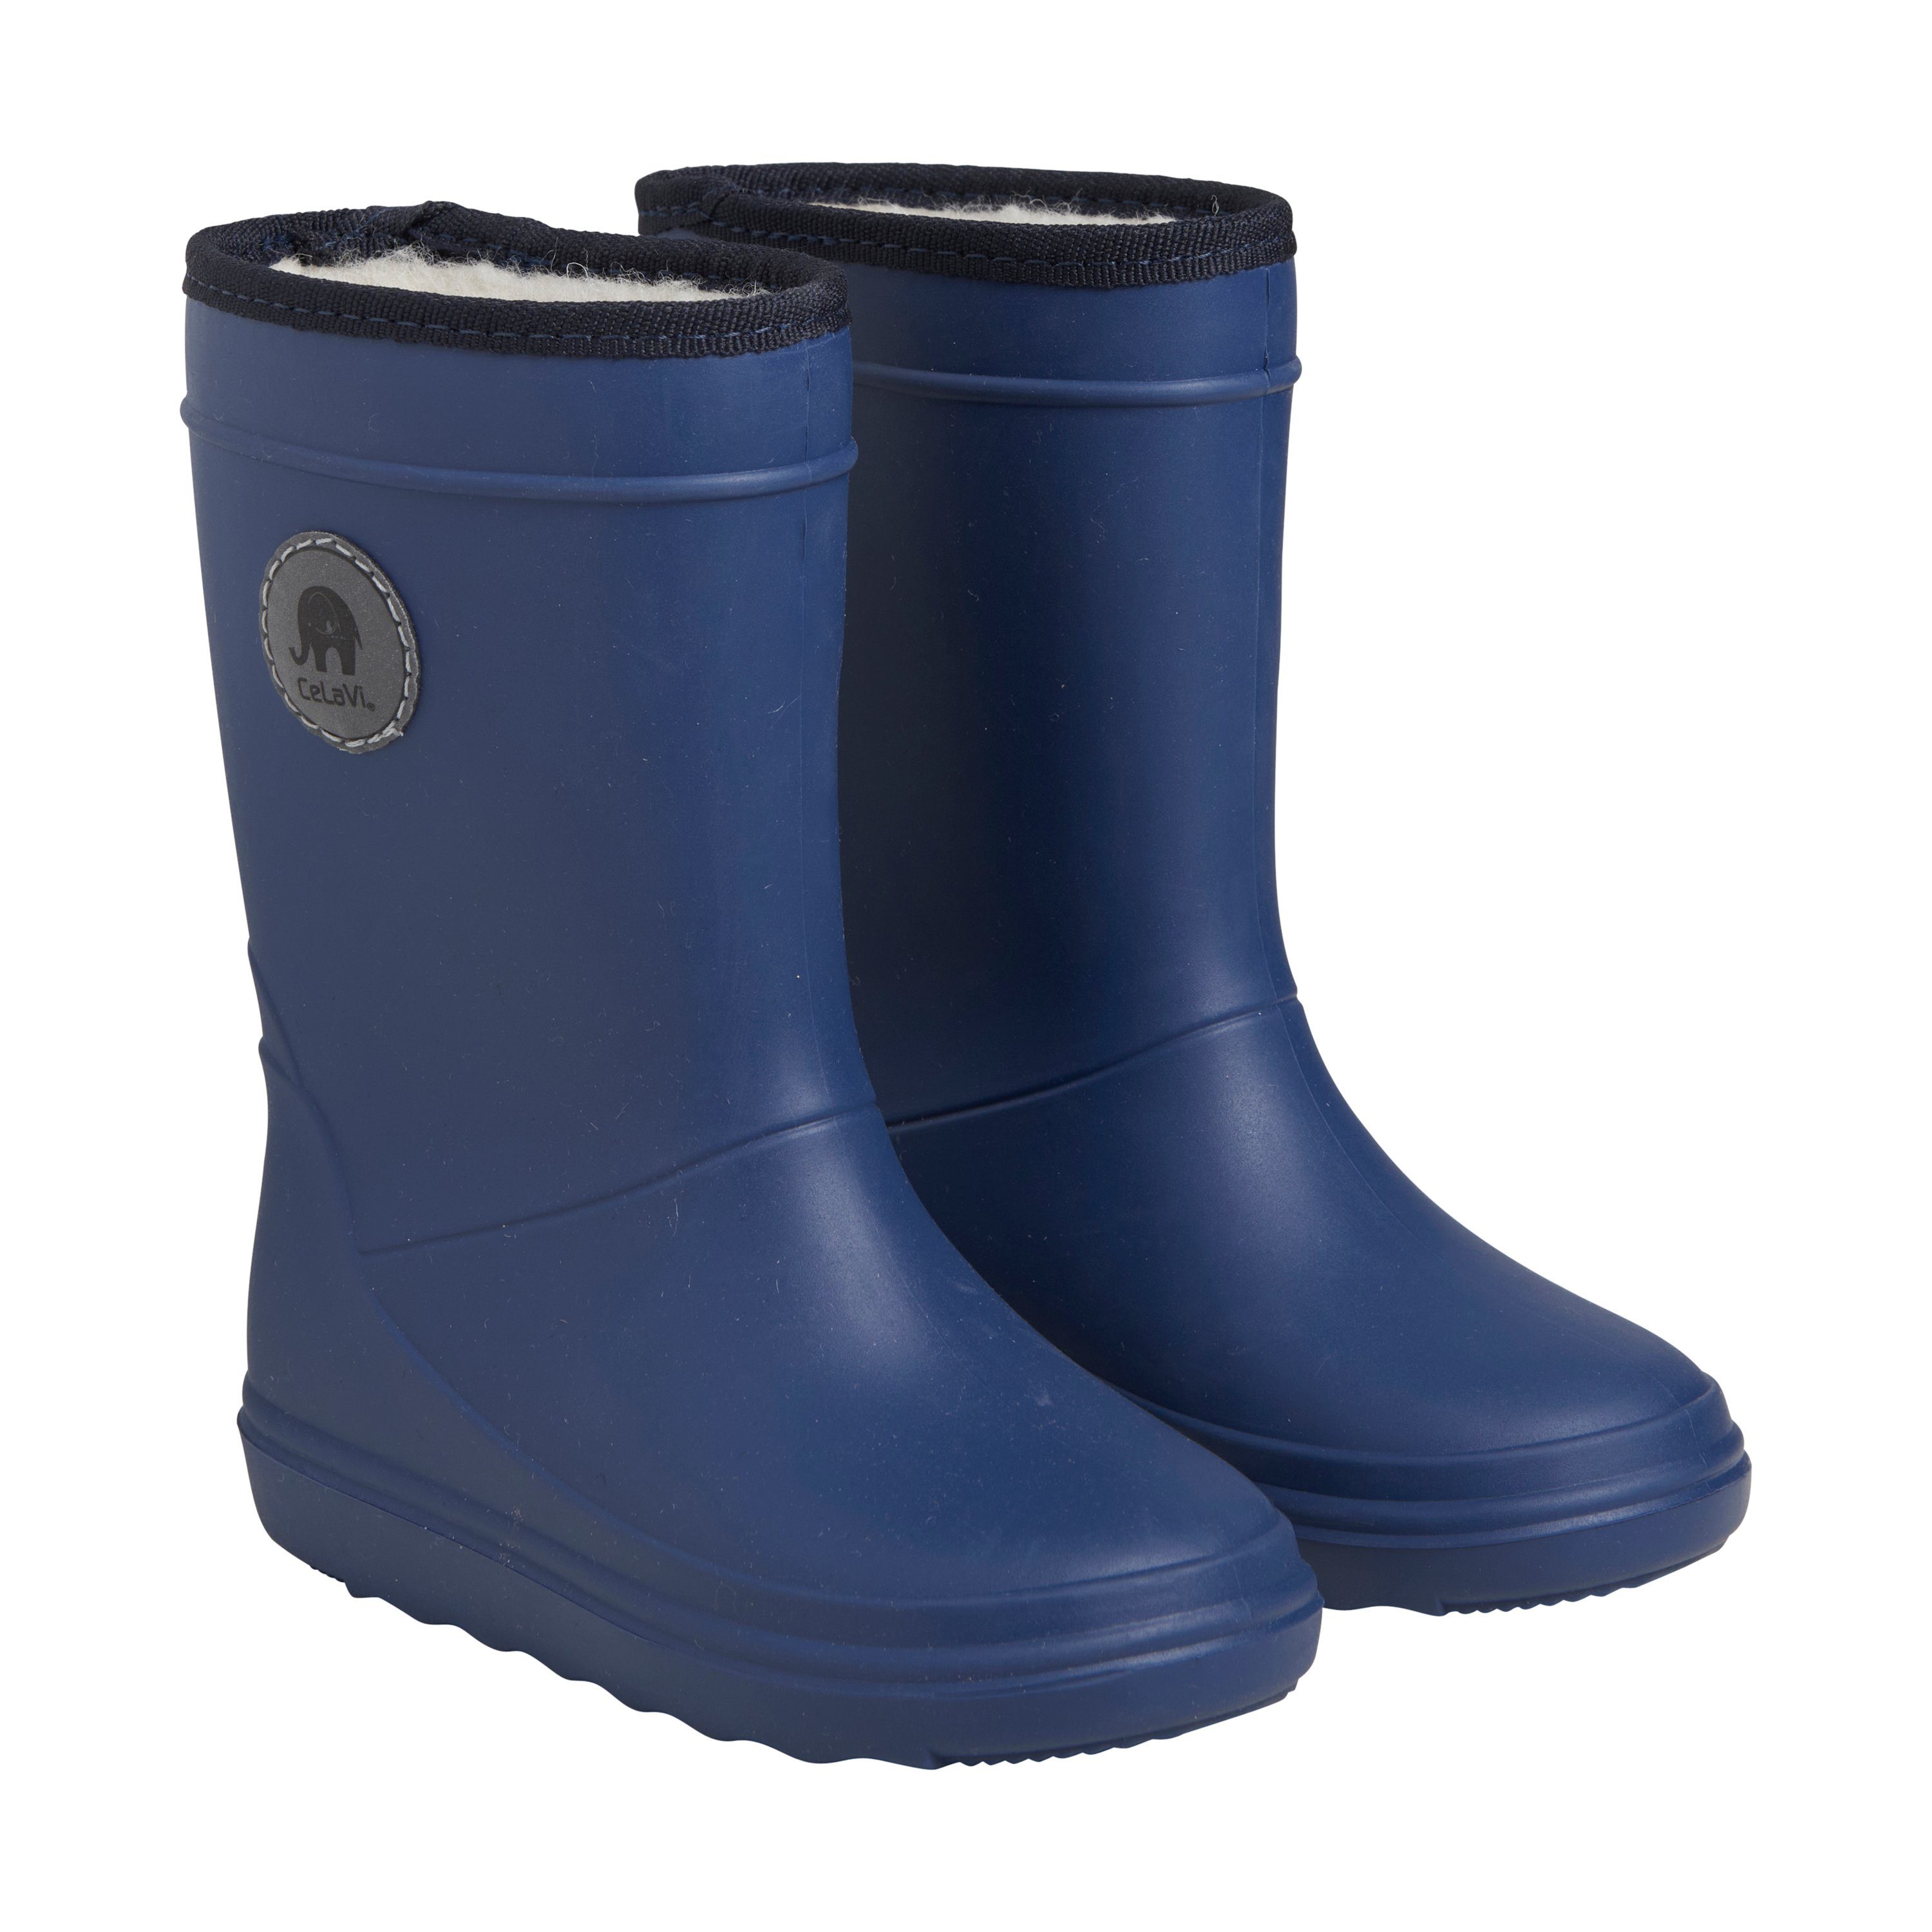 CeLaVi CEThermo Boots - 6274 Winterboots Pageant Blue (790)